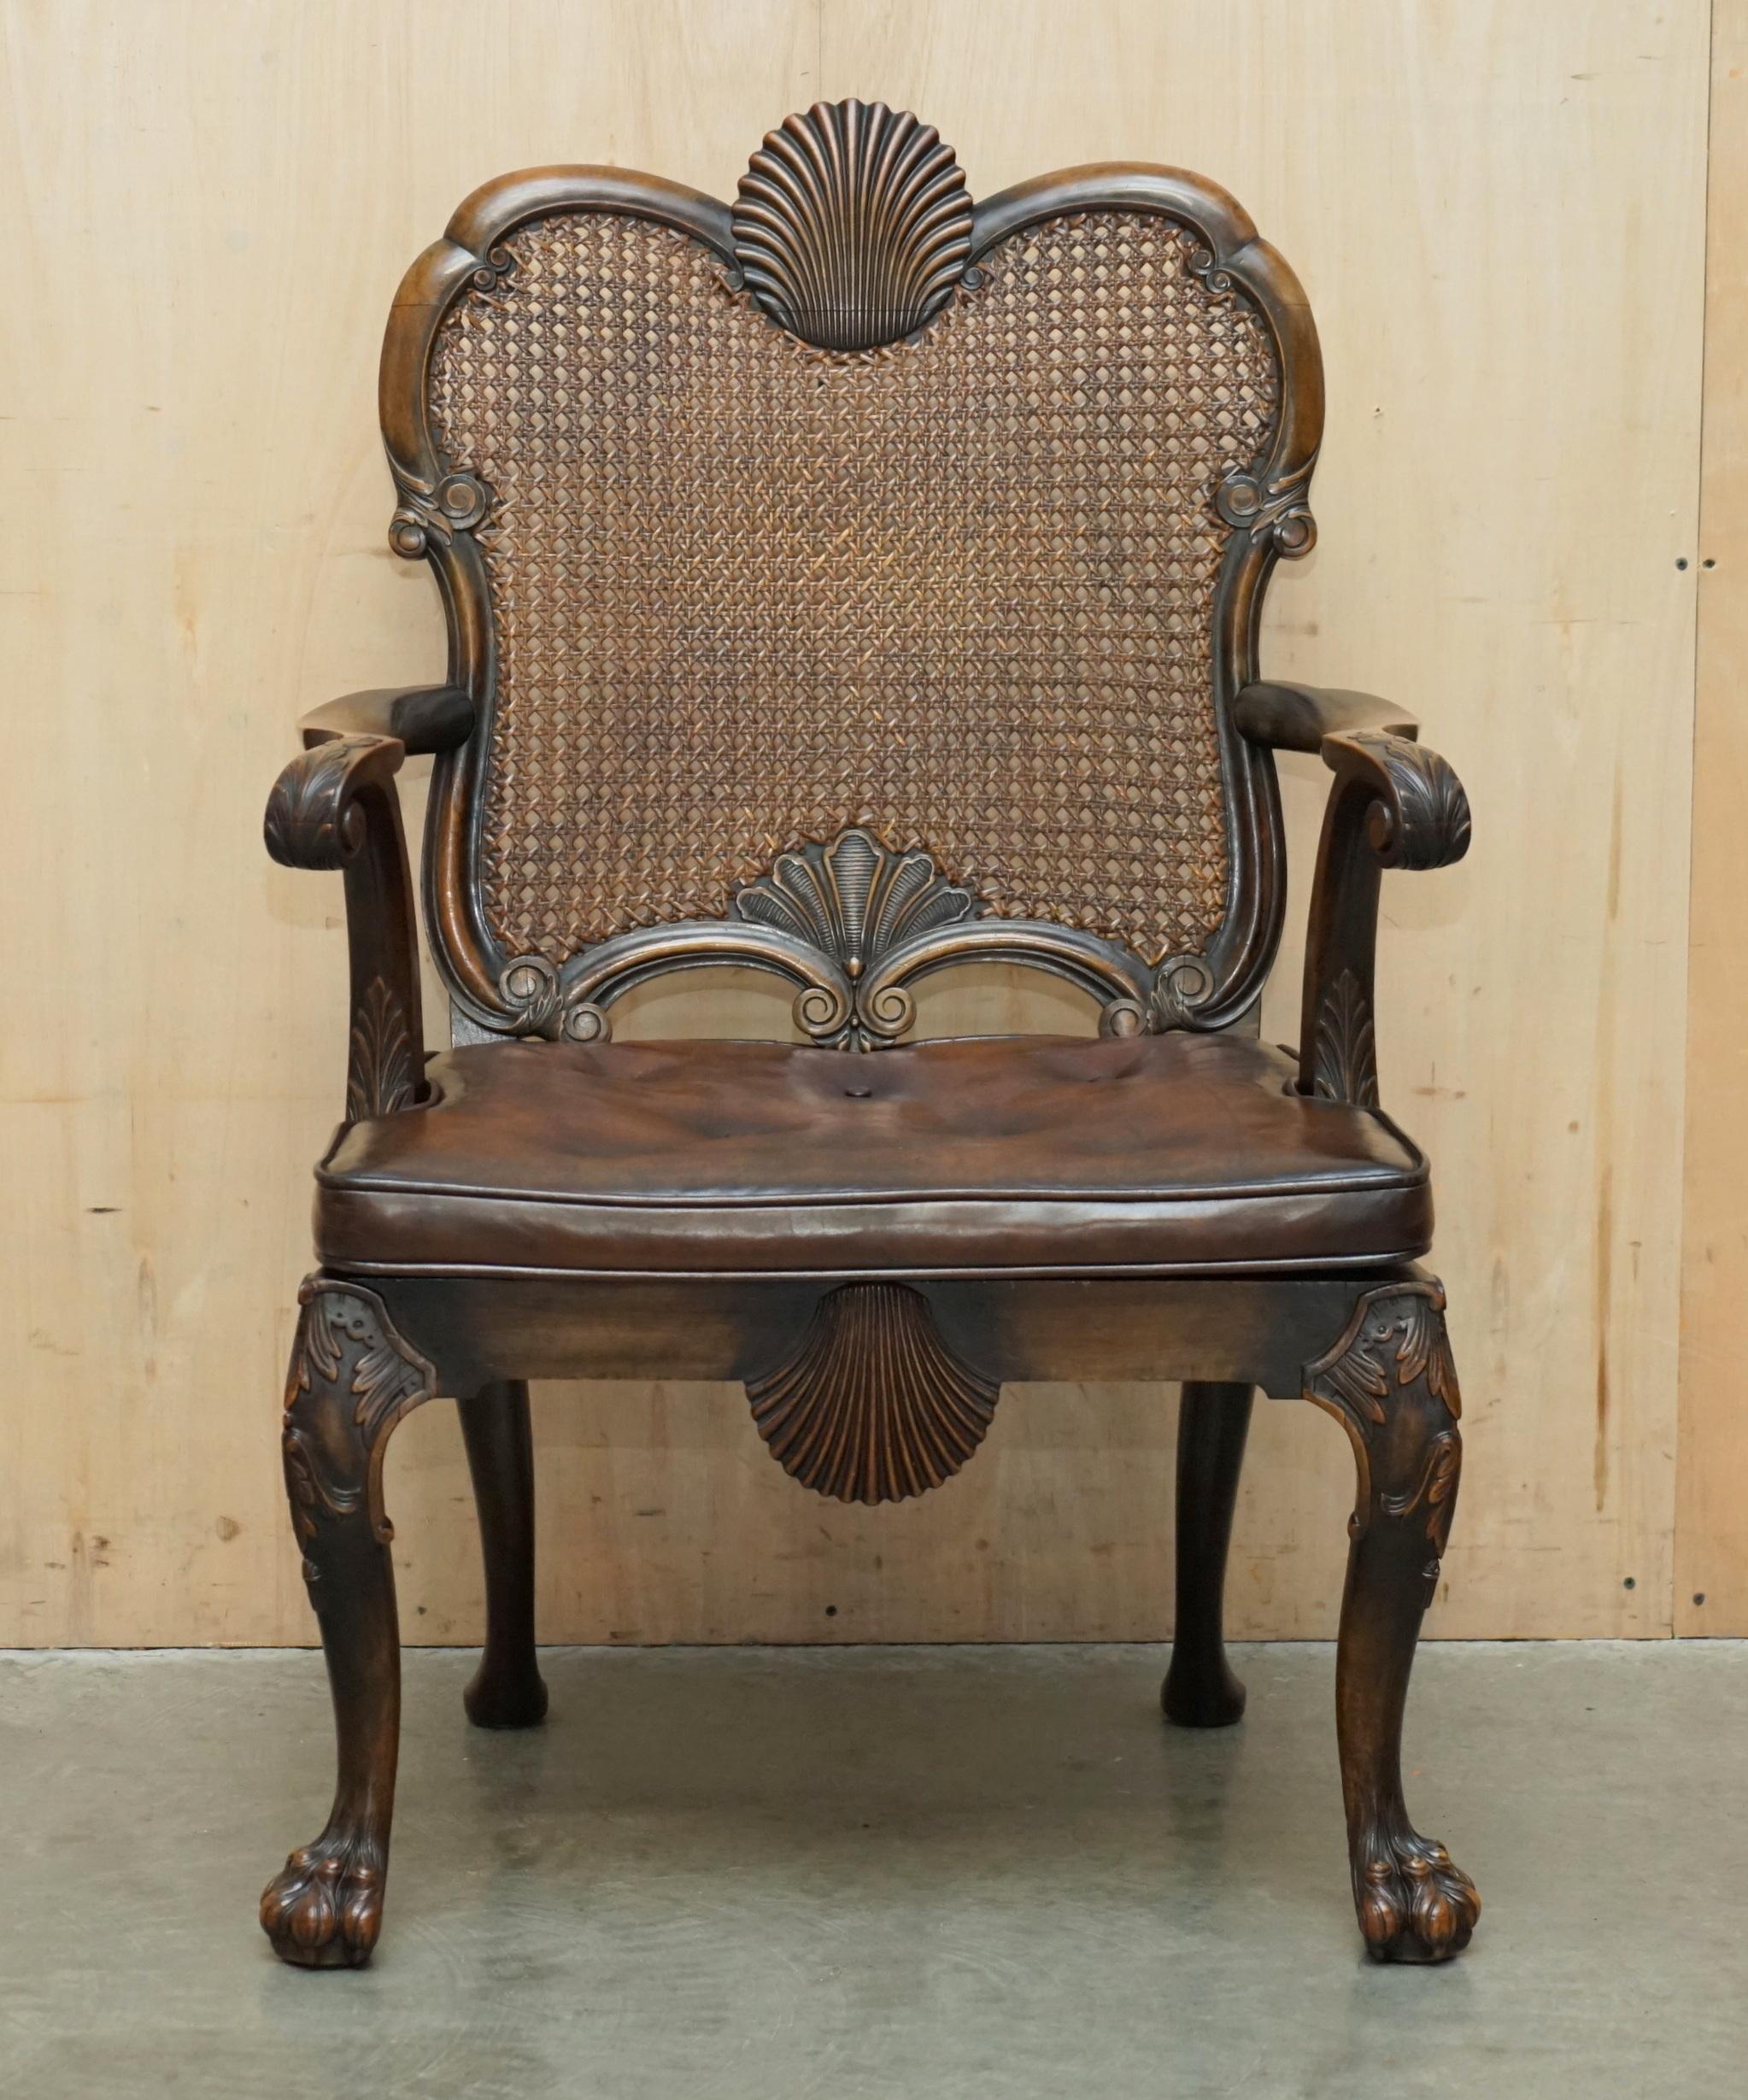 Royal House Antiques

Royal House Antiques is delighted to offer for sale this very rare and highly collectable, Circa 1880 Thomas Chippendale style carved with Lion's hairy Paw feet and hand dyed brown leather seat pad armchair 

Please note the